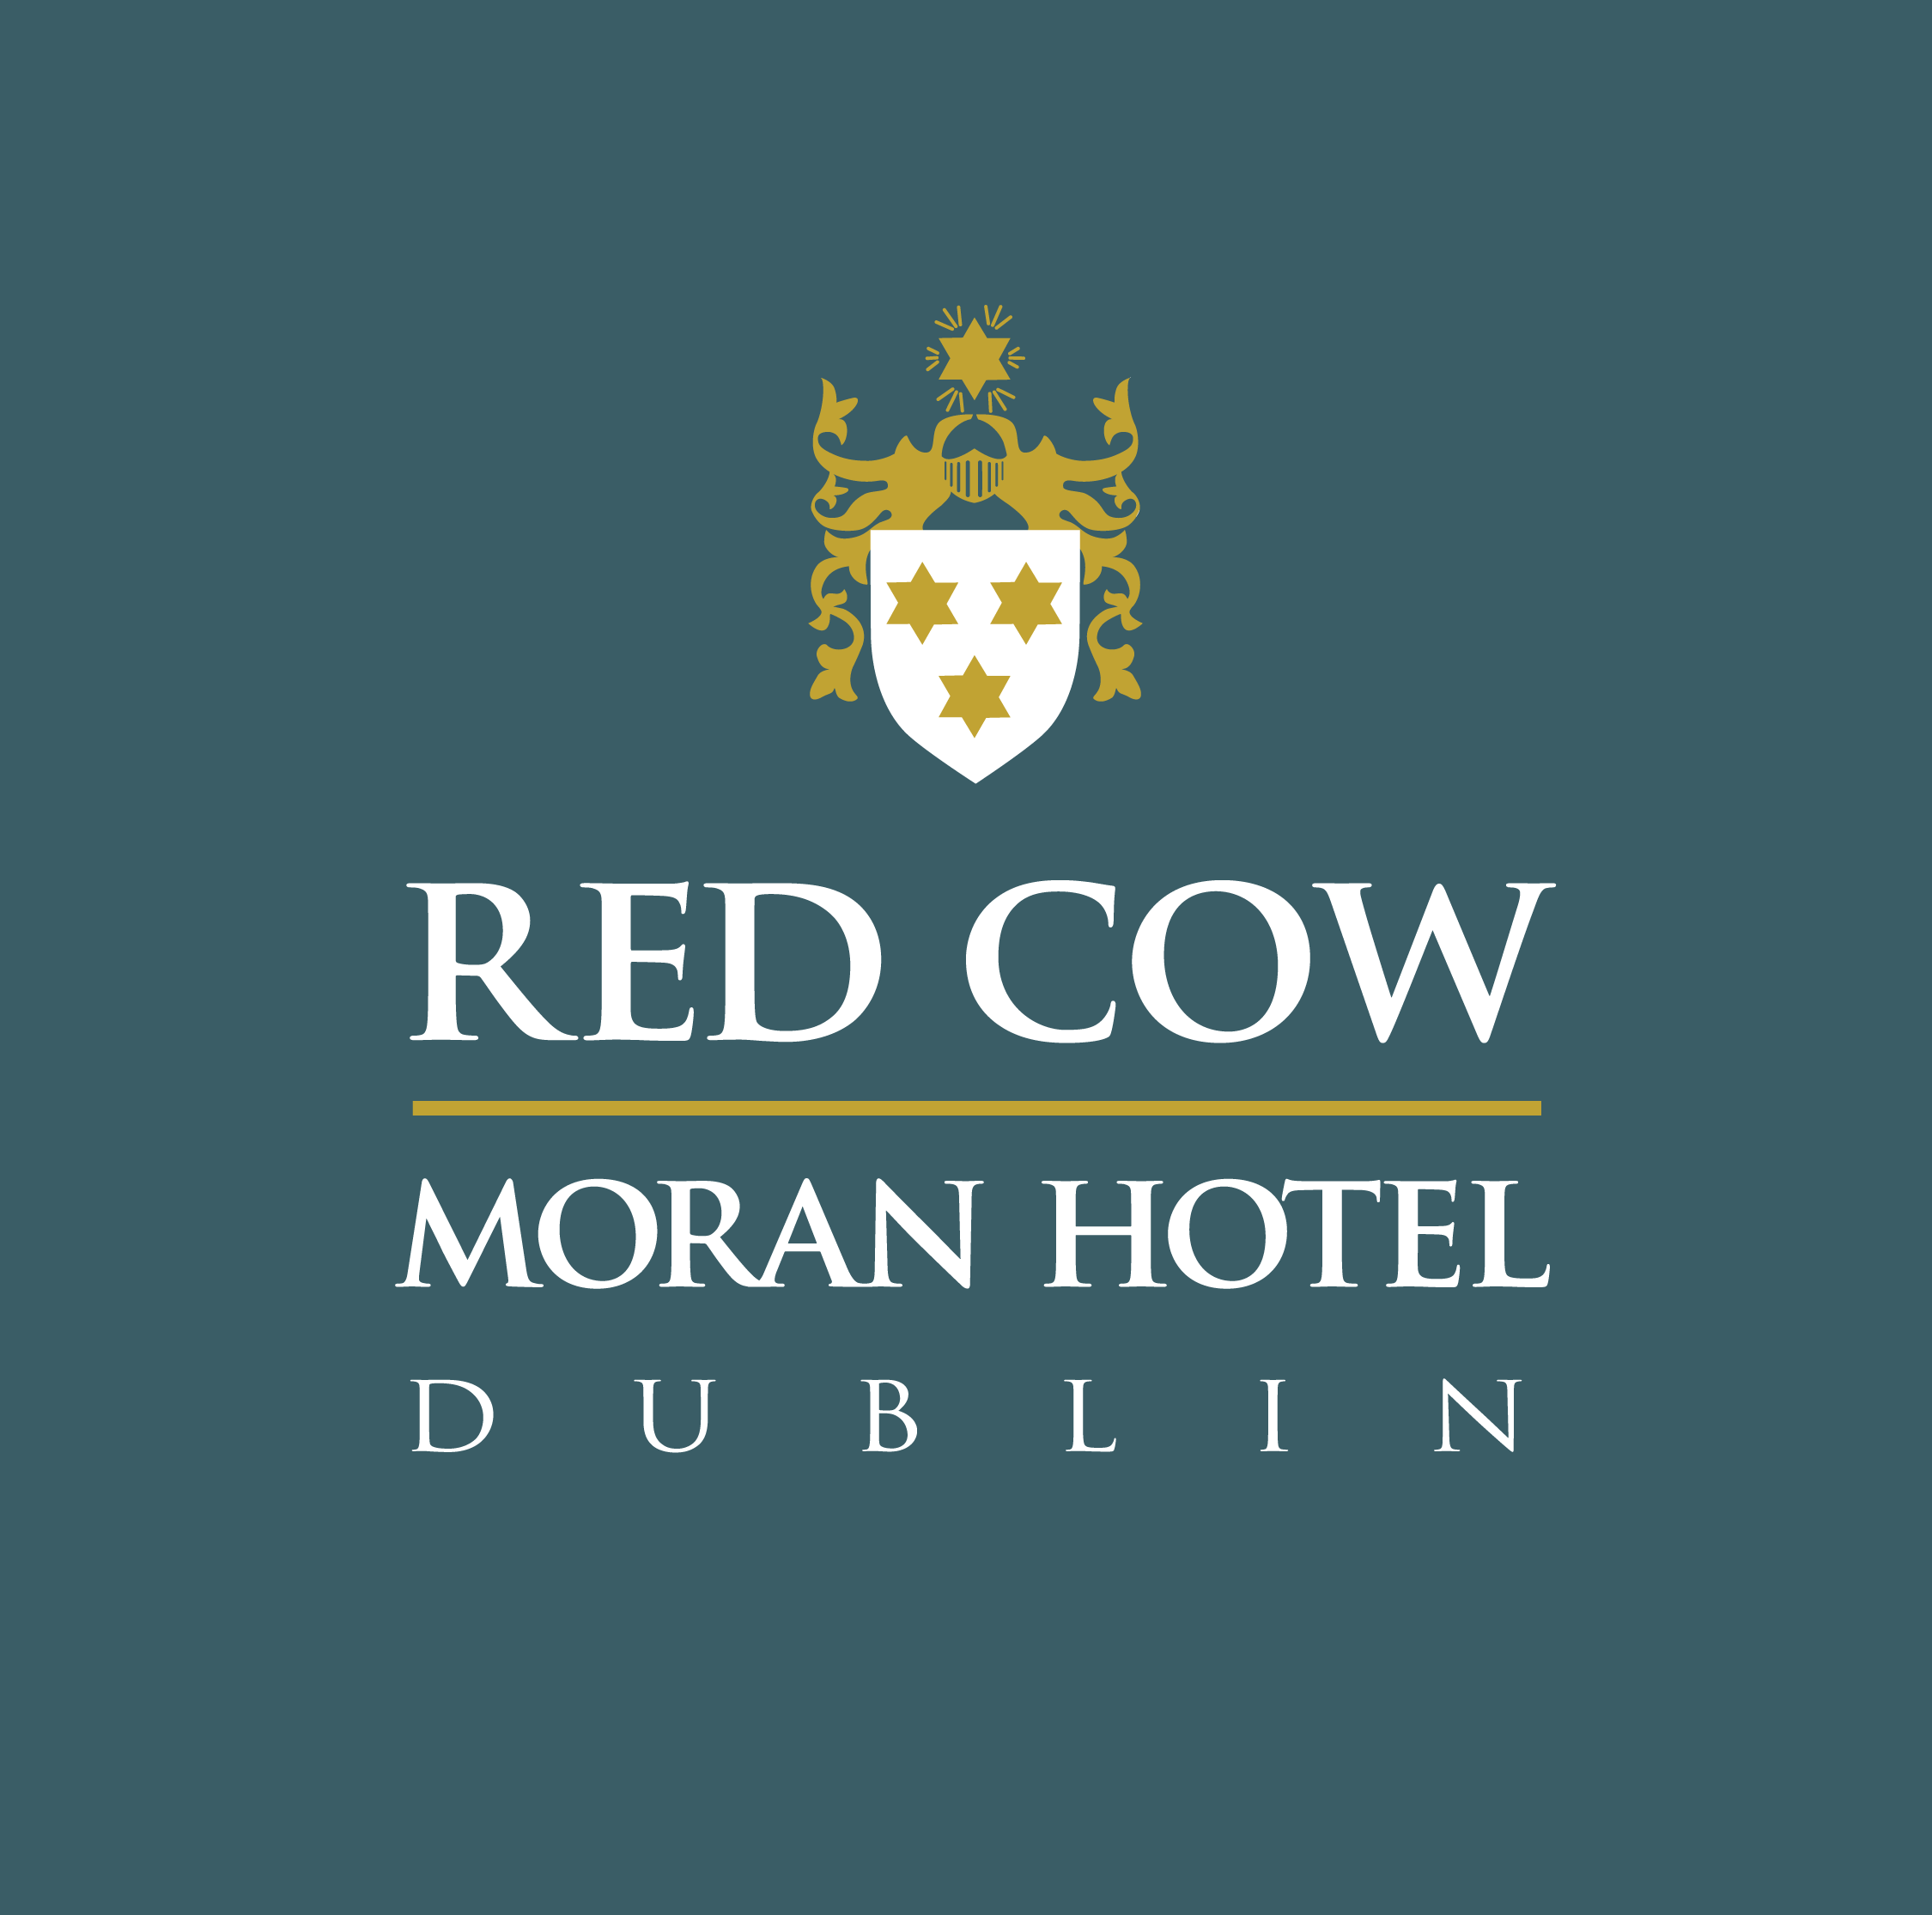 Red and Green Hotel Logo - Red Cow Moran Hotel Logo - Fine Gael